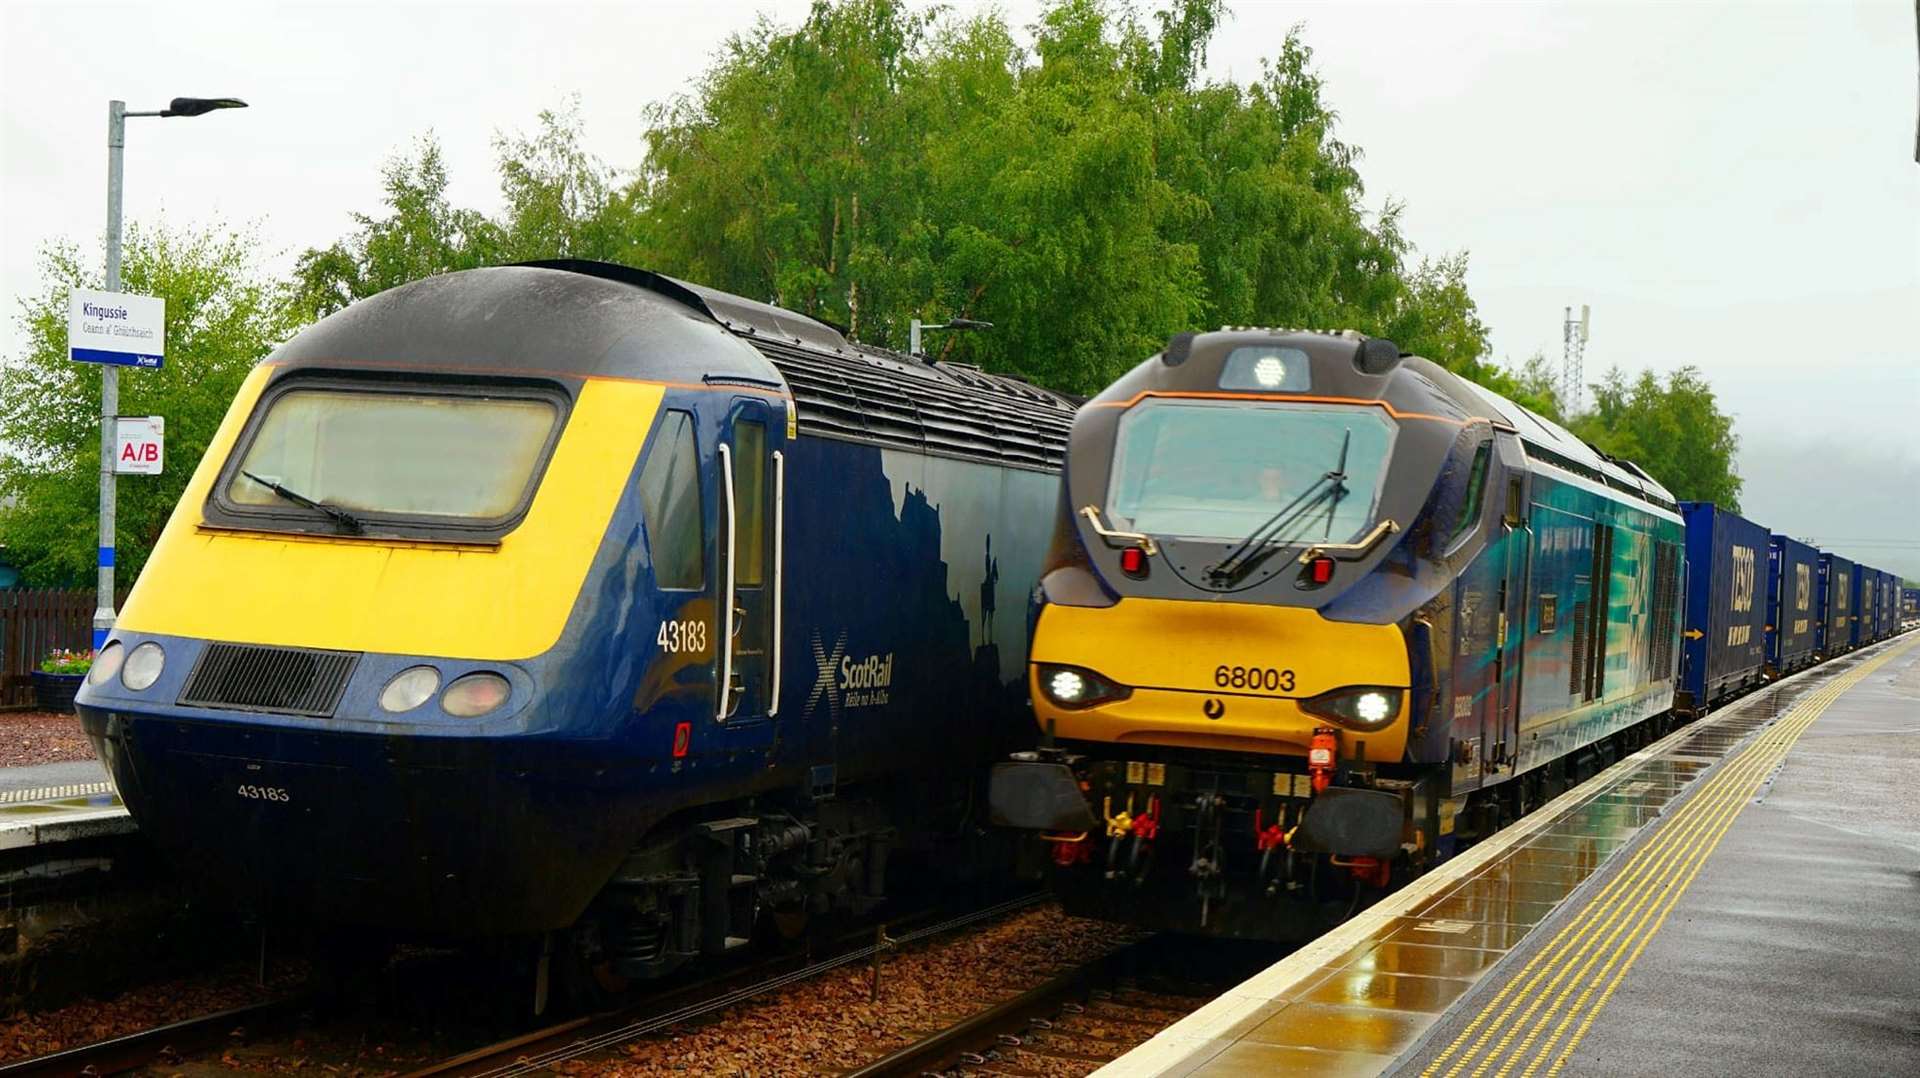 The service is returning to normal after a weather-hit weekend, says ScotRail.